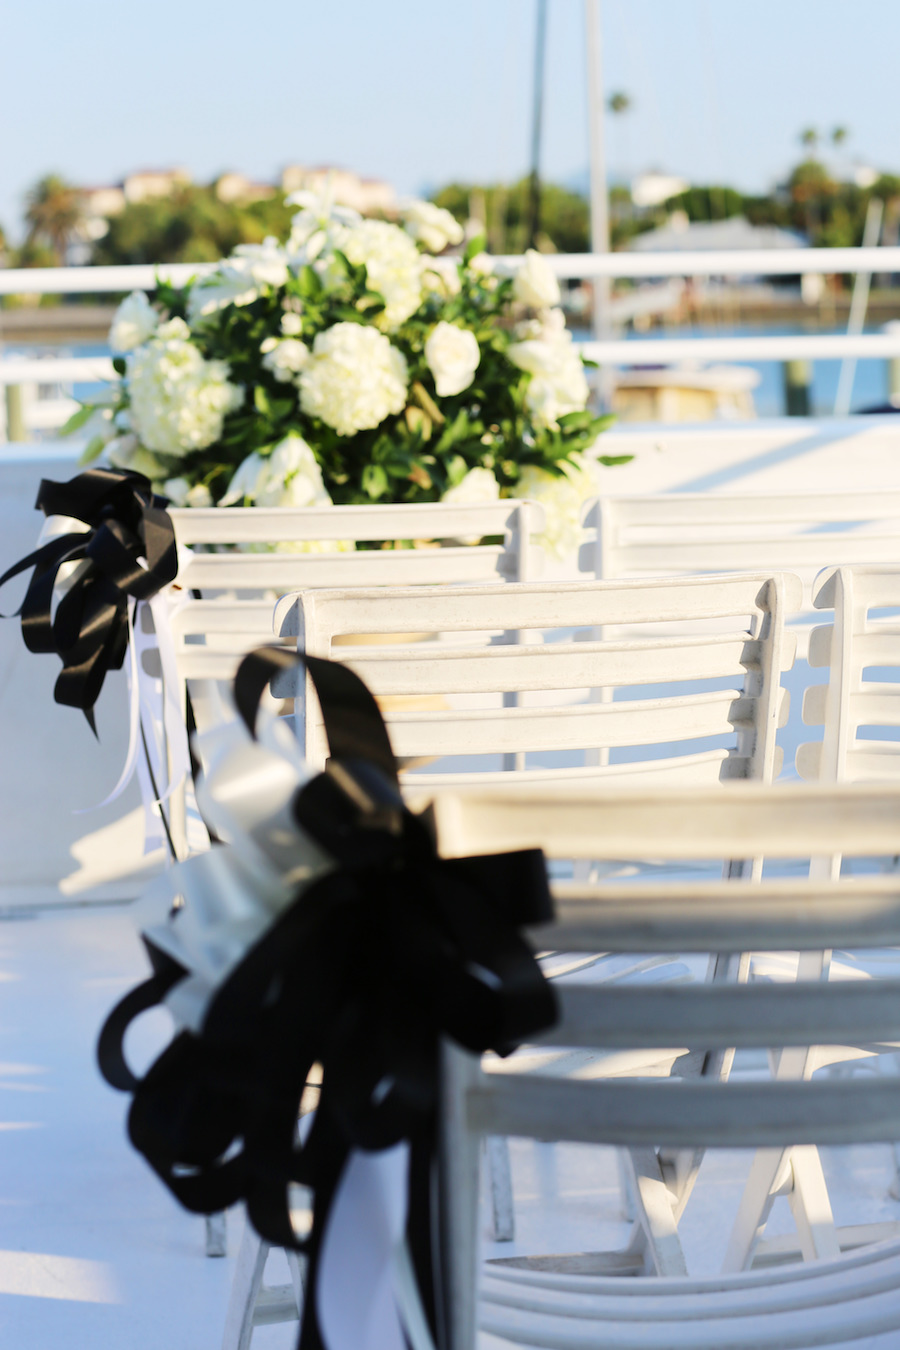 Clearwater Wedding Venue Yacht Starship Sensation Ceremony with White Chairs and White Floral Arrangements